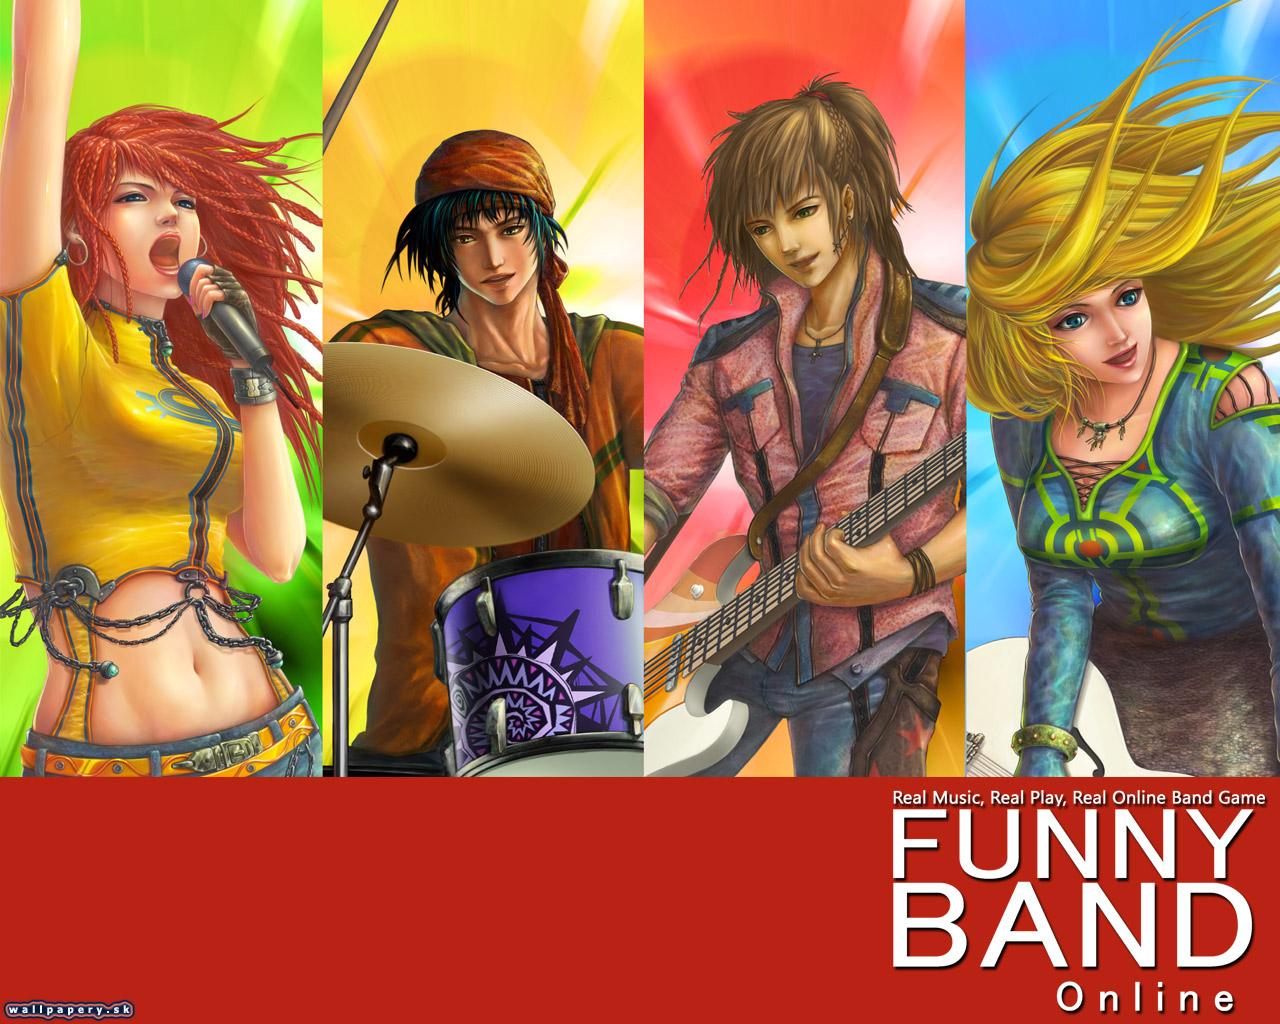 Funny Band Online - wallpaper 1